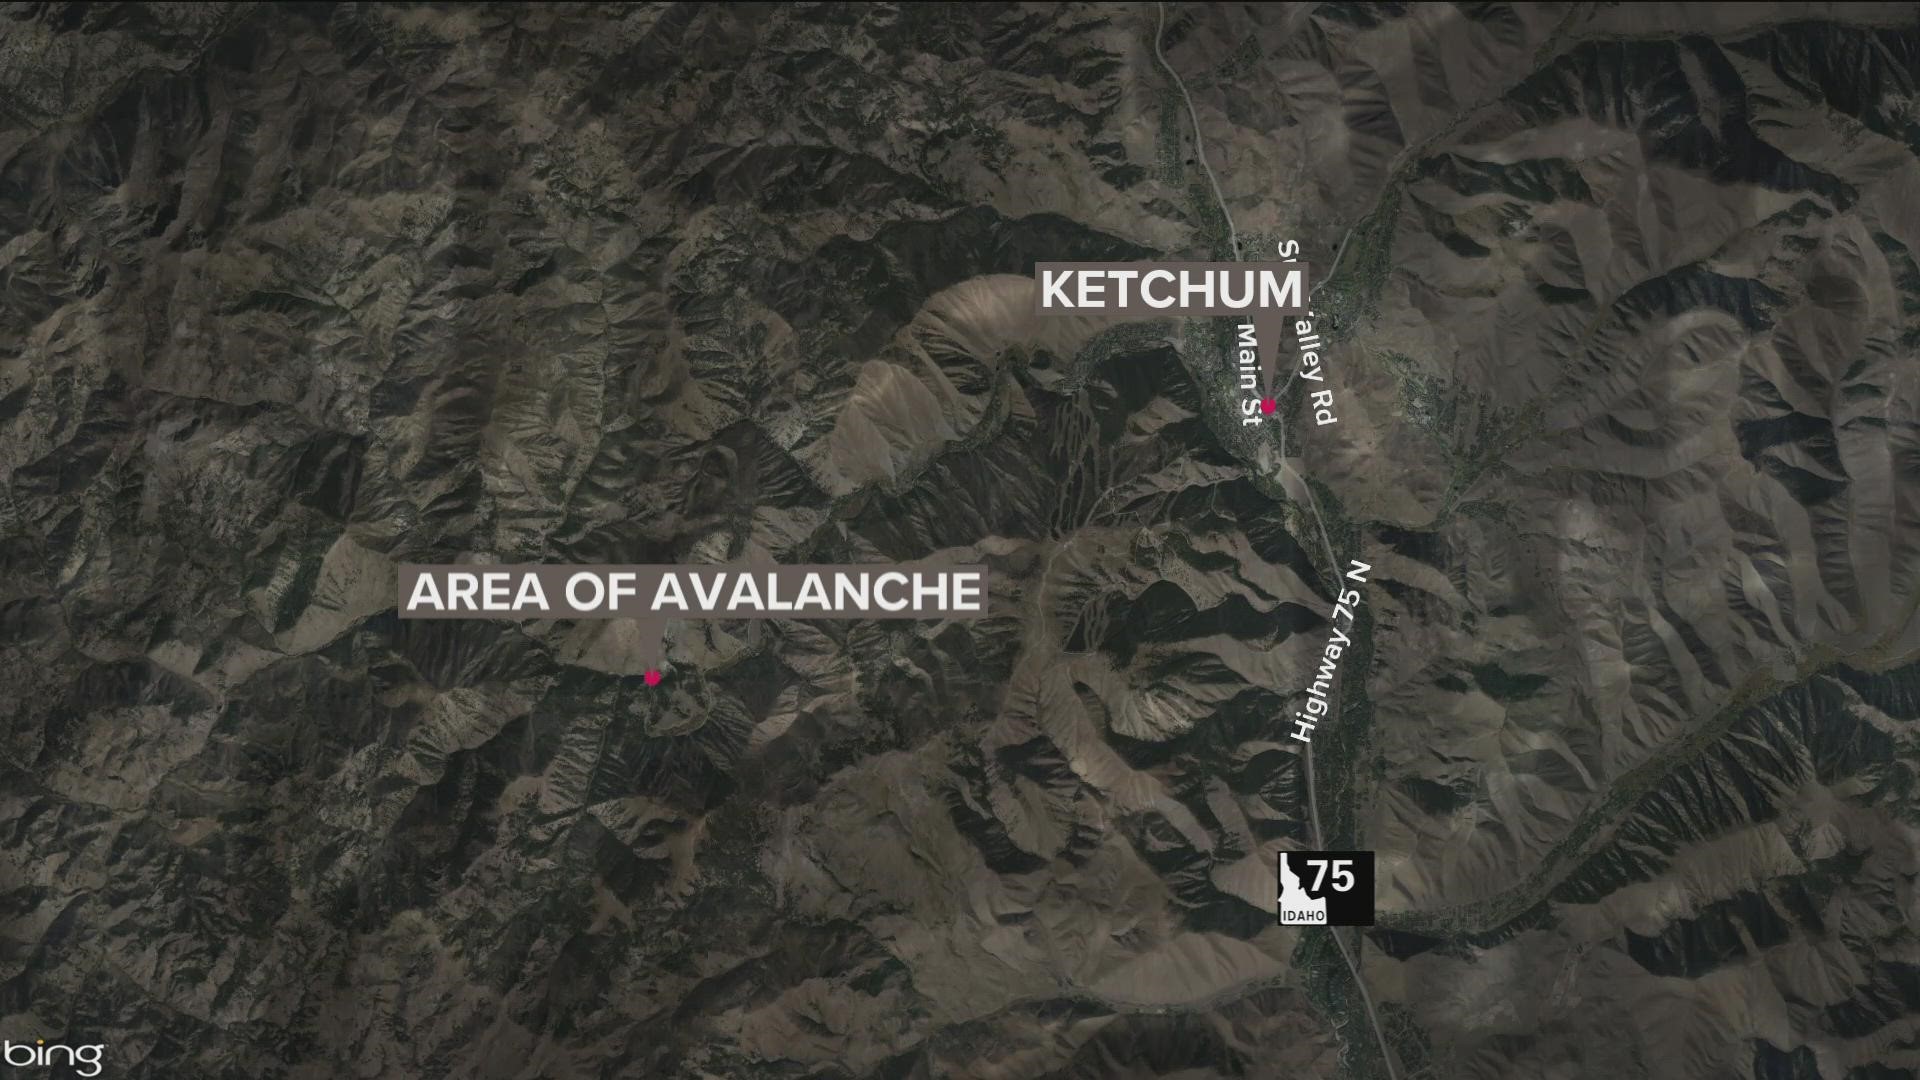 The Blaine County Sheriff's Office at 3 p.m. Friday said Warm Springs Road in Ketchum is open. Part of the road was blocked by the second avalanche in three days.